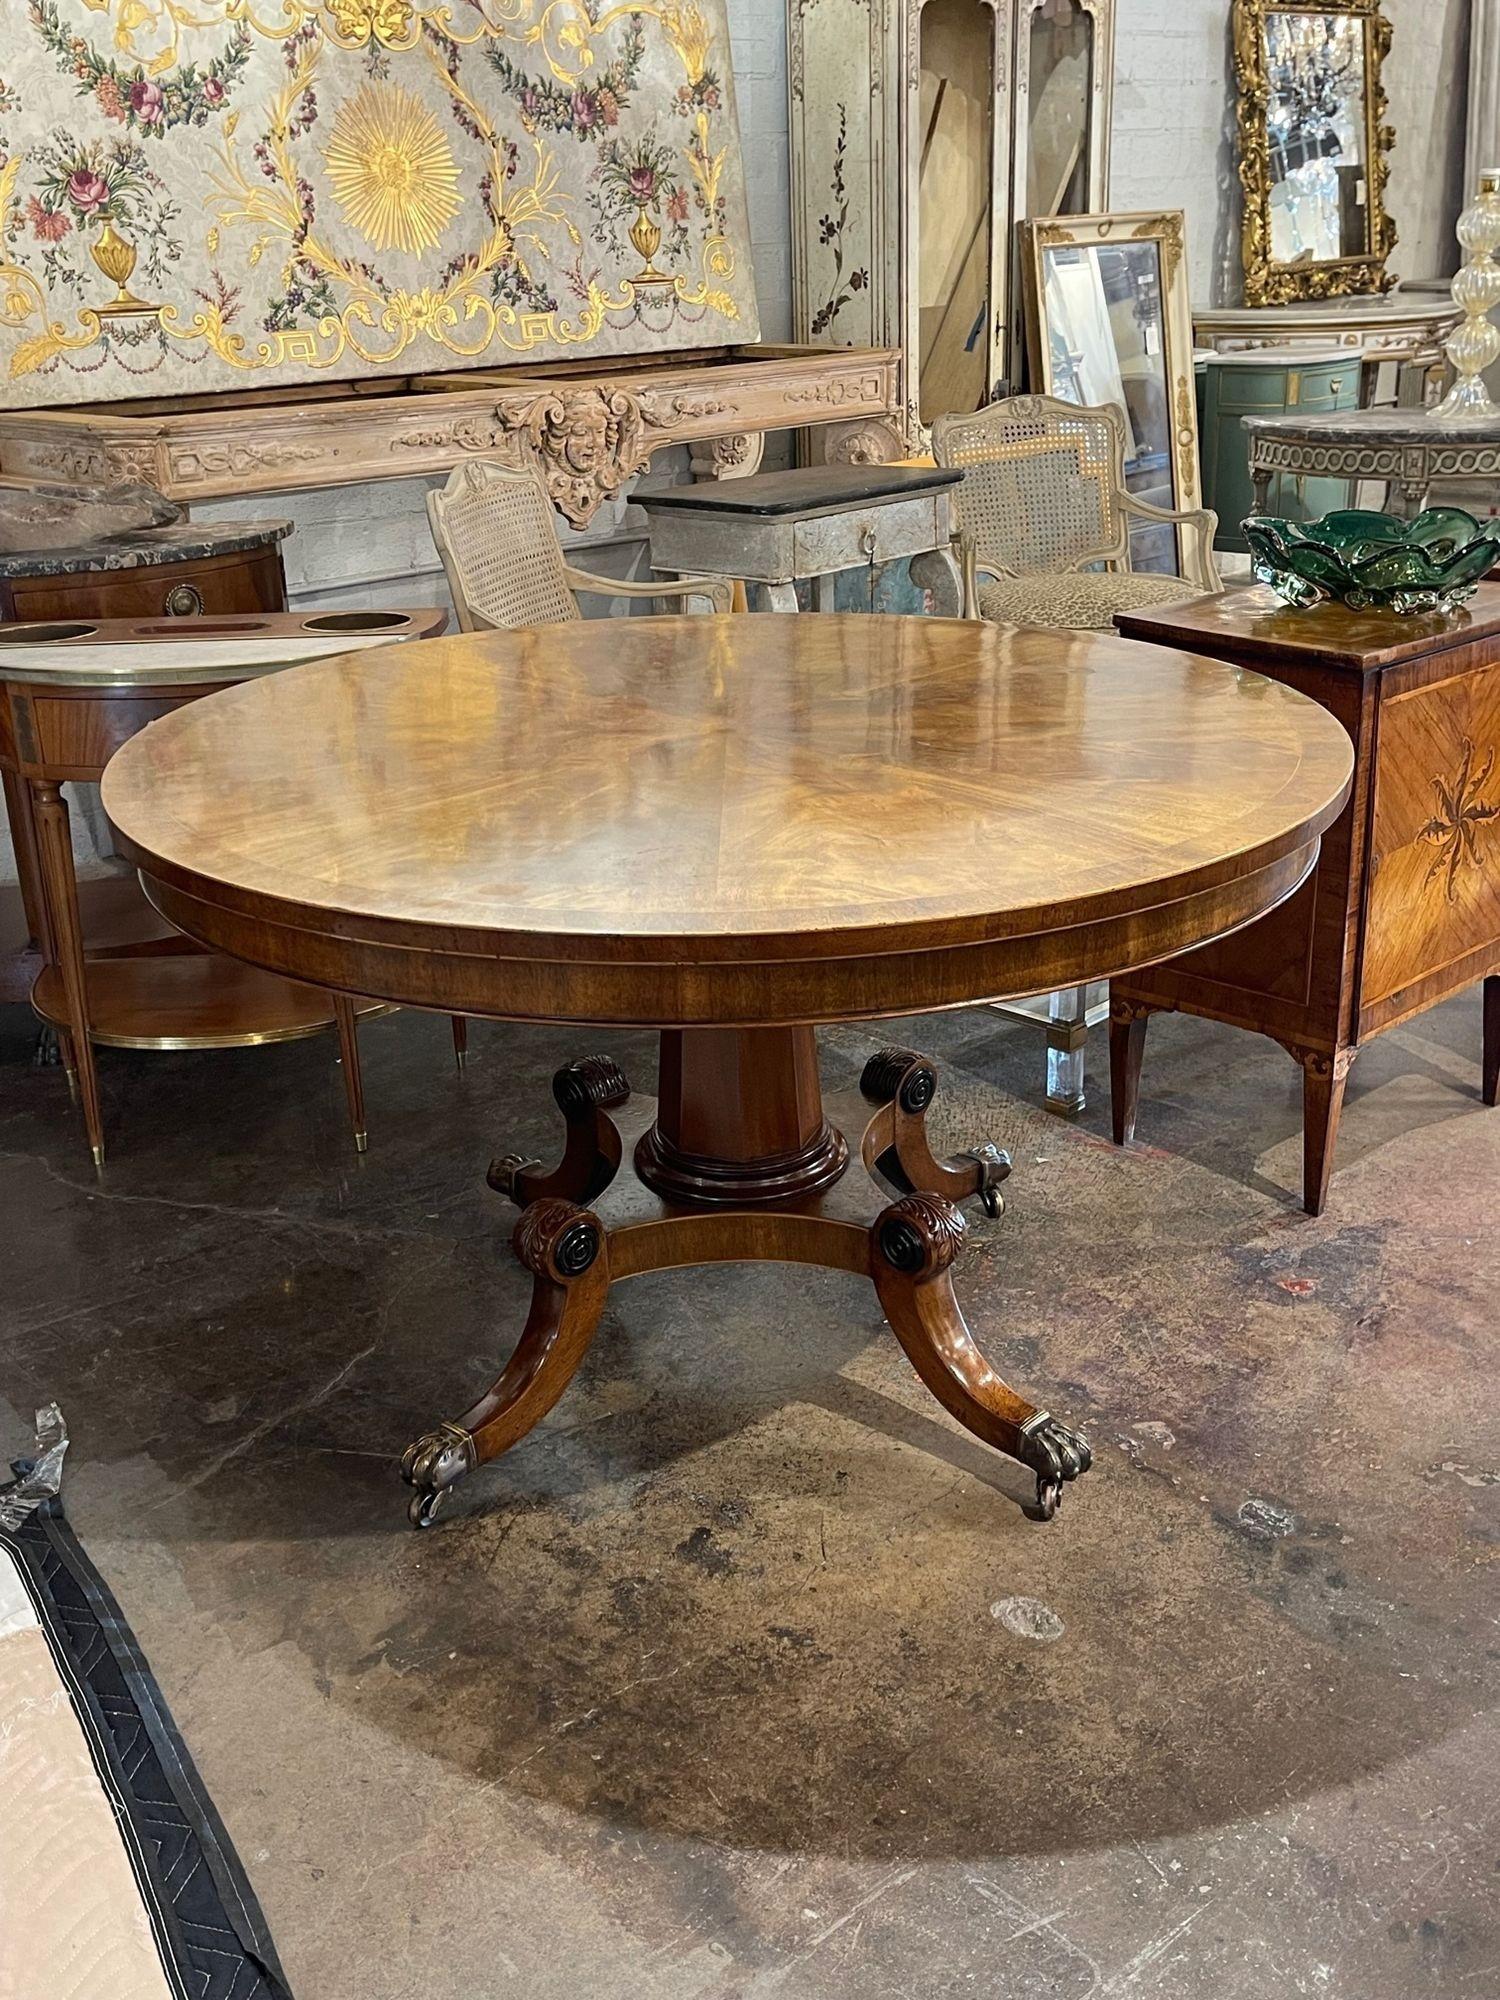 Handsome 19th century English Regency style flame mahogany center table. Very pretty wood grain and beautiful polished finish. A gorgeous elegant table!!